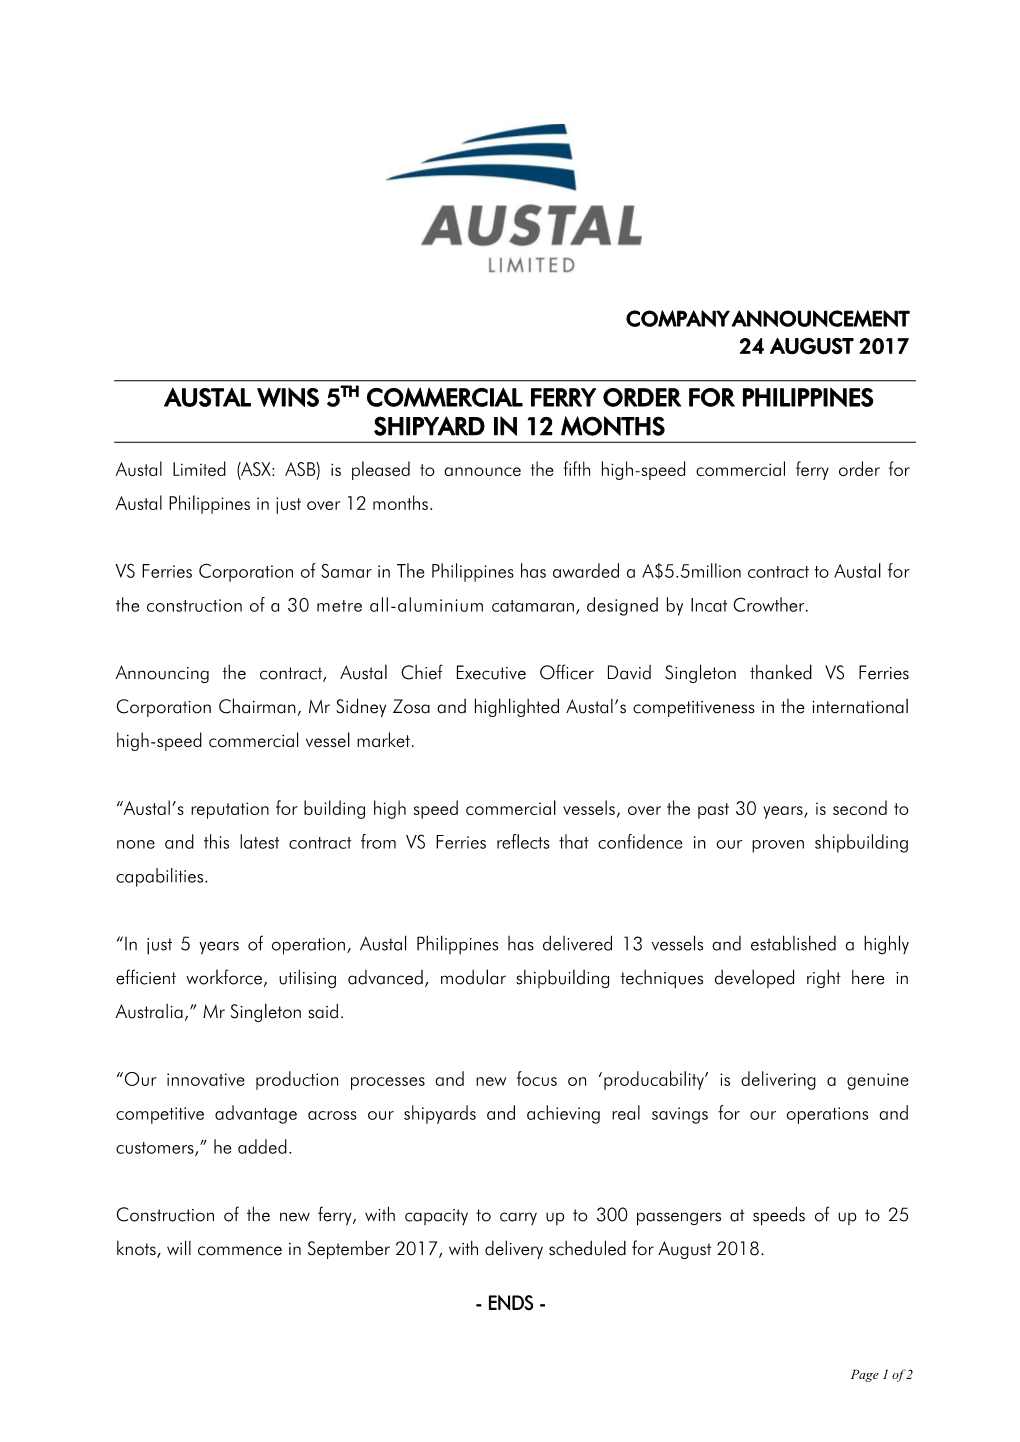 Austal Wins 5Th Commercial Ferry Order for Philippines Shipyard in 12 Months